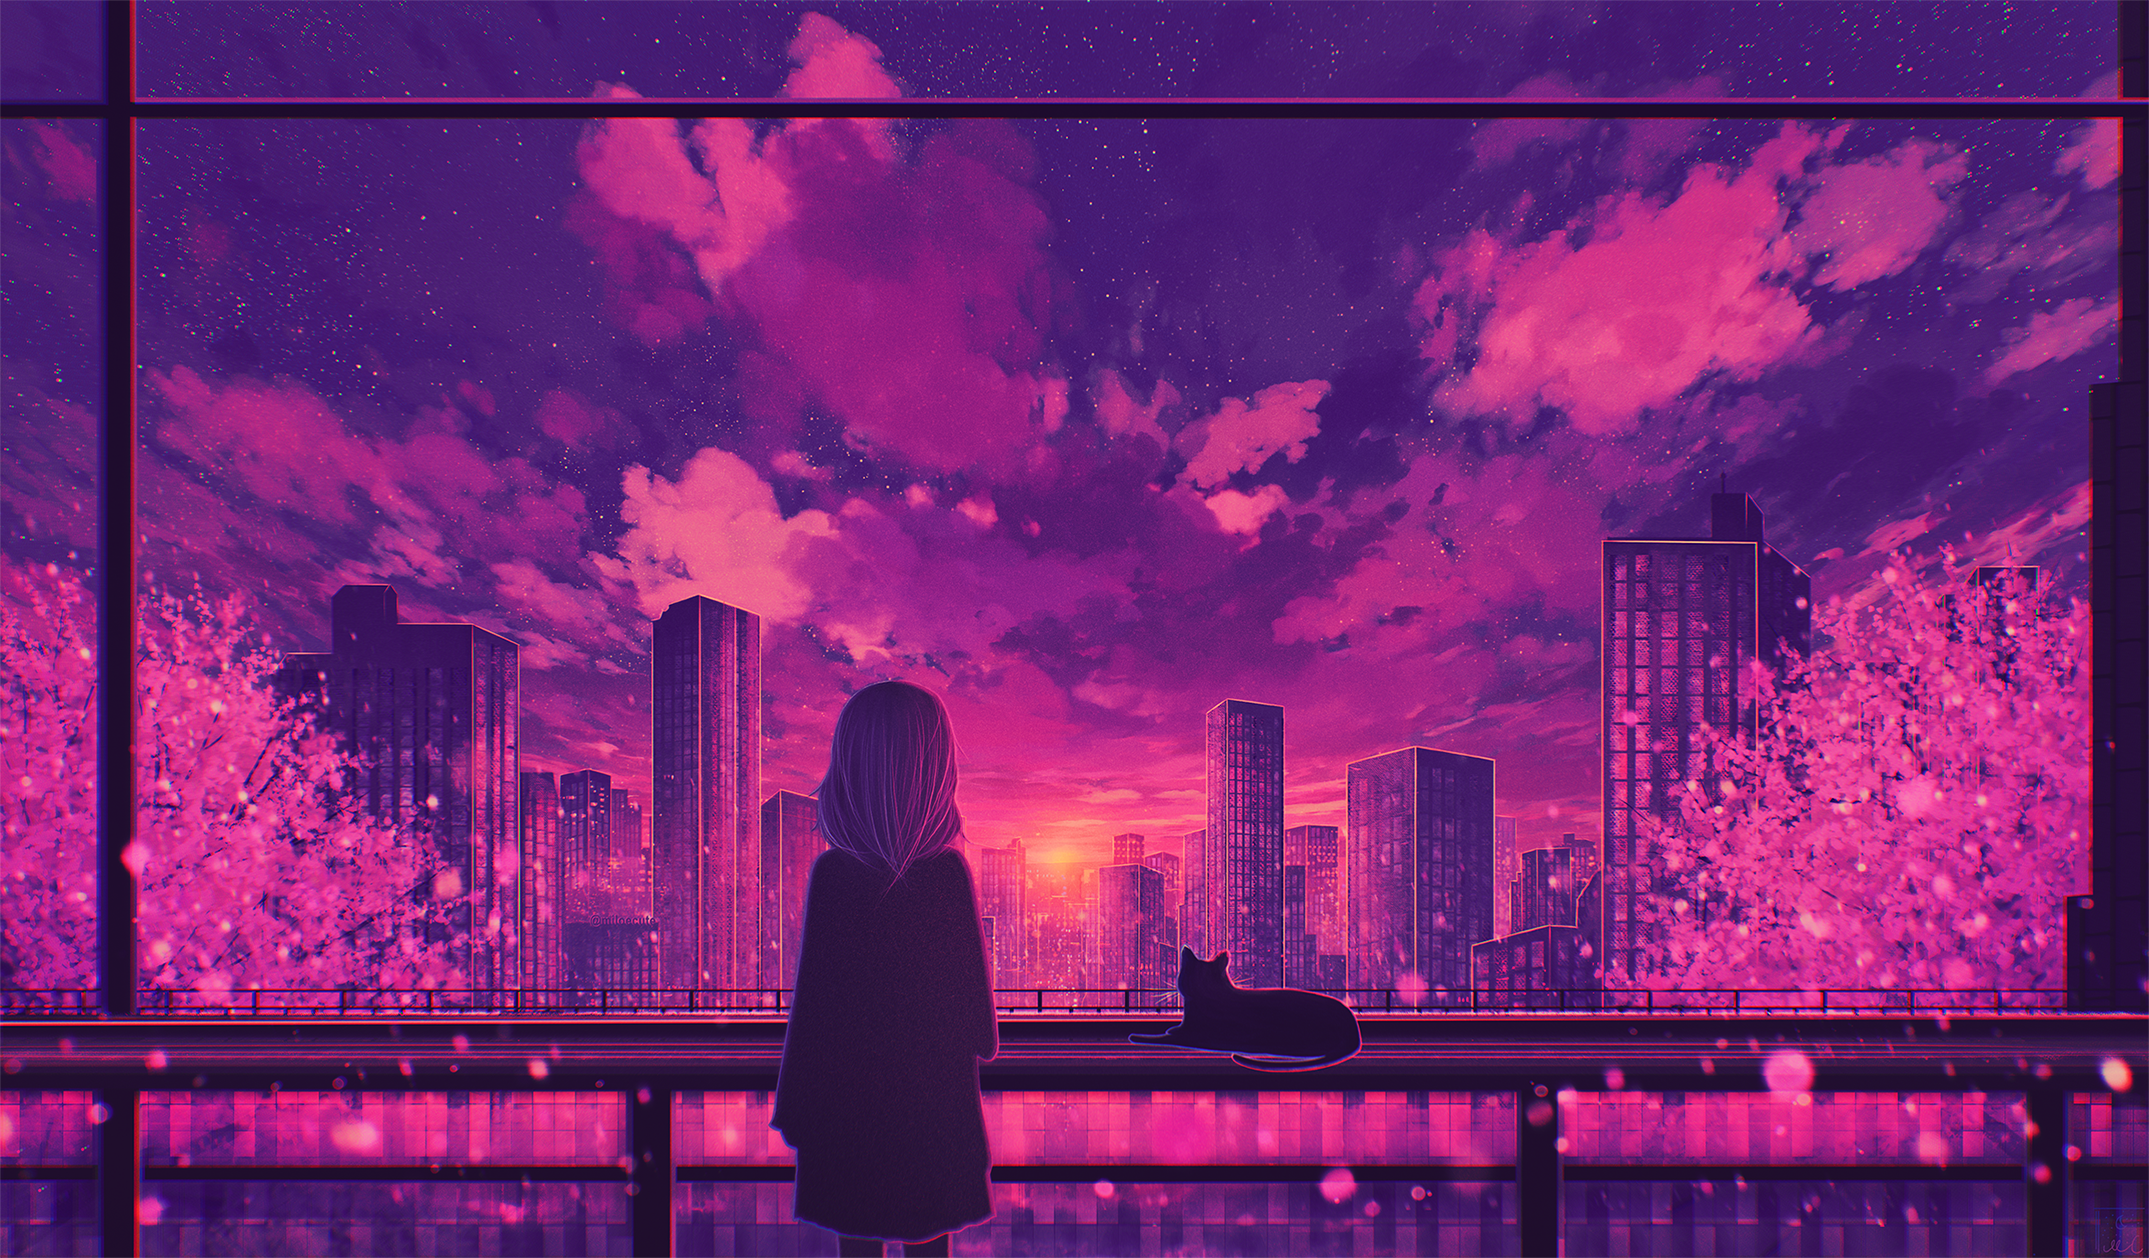 Anime Anime Girls Clouds City Stars Sunset Shoulder Length Hair Trees Fence Purple Background Buildi Wallpaper:2149x1258